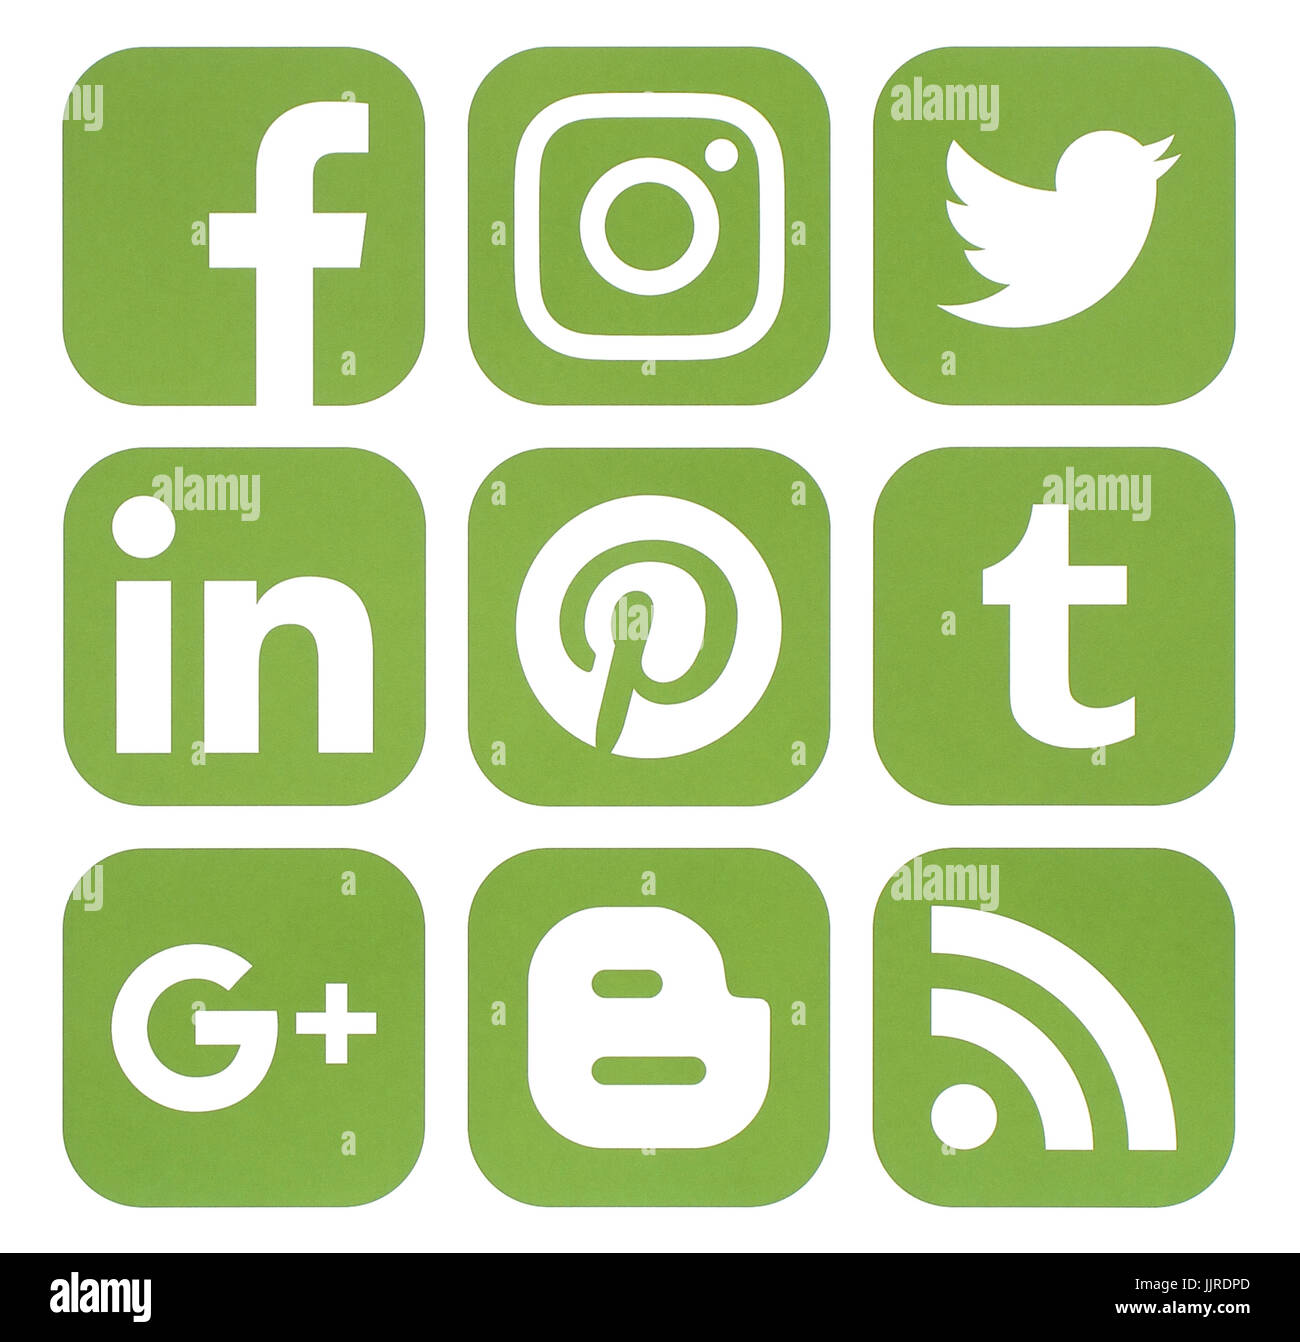 Kiev, Ukraine - January 24, 2017: Collection of popular social media icons in greenery color, printed on paper: Facebook, Twitter, Google Plus, Instag Stock Photo